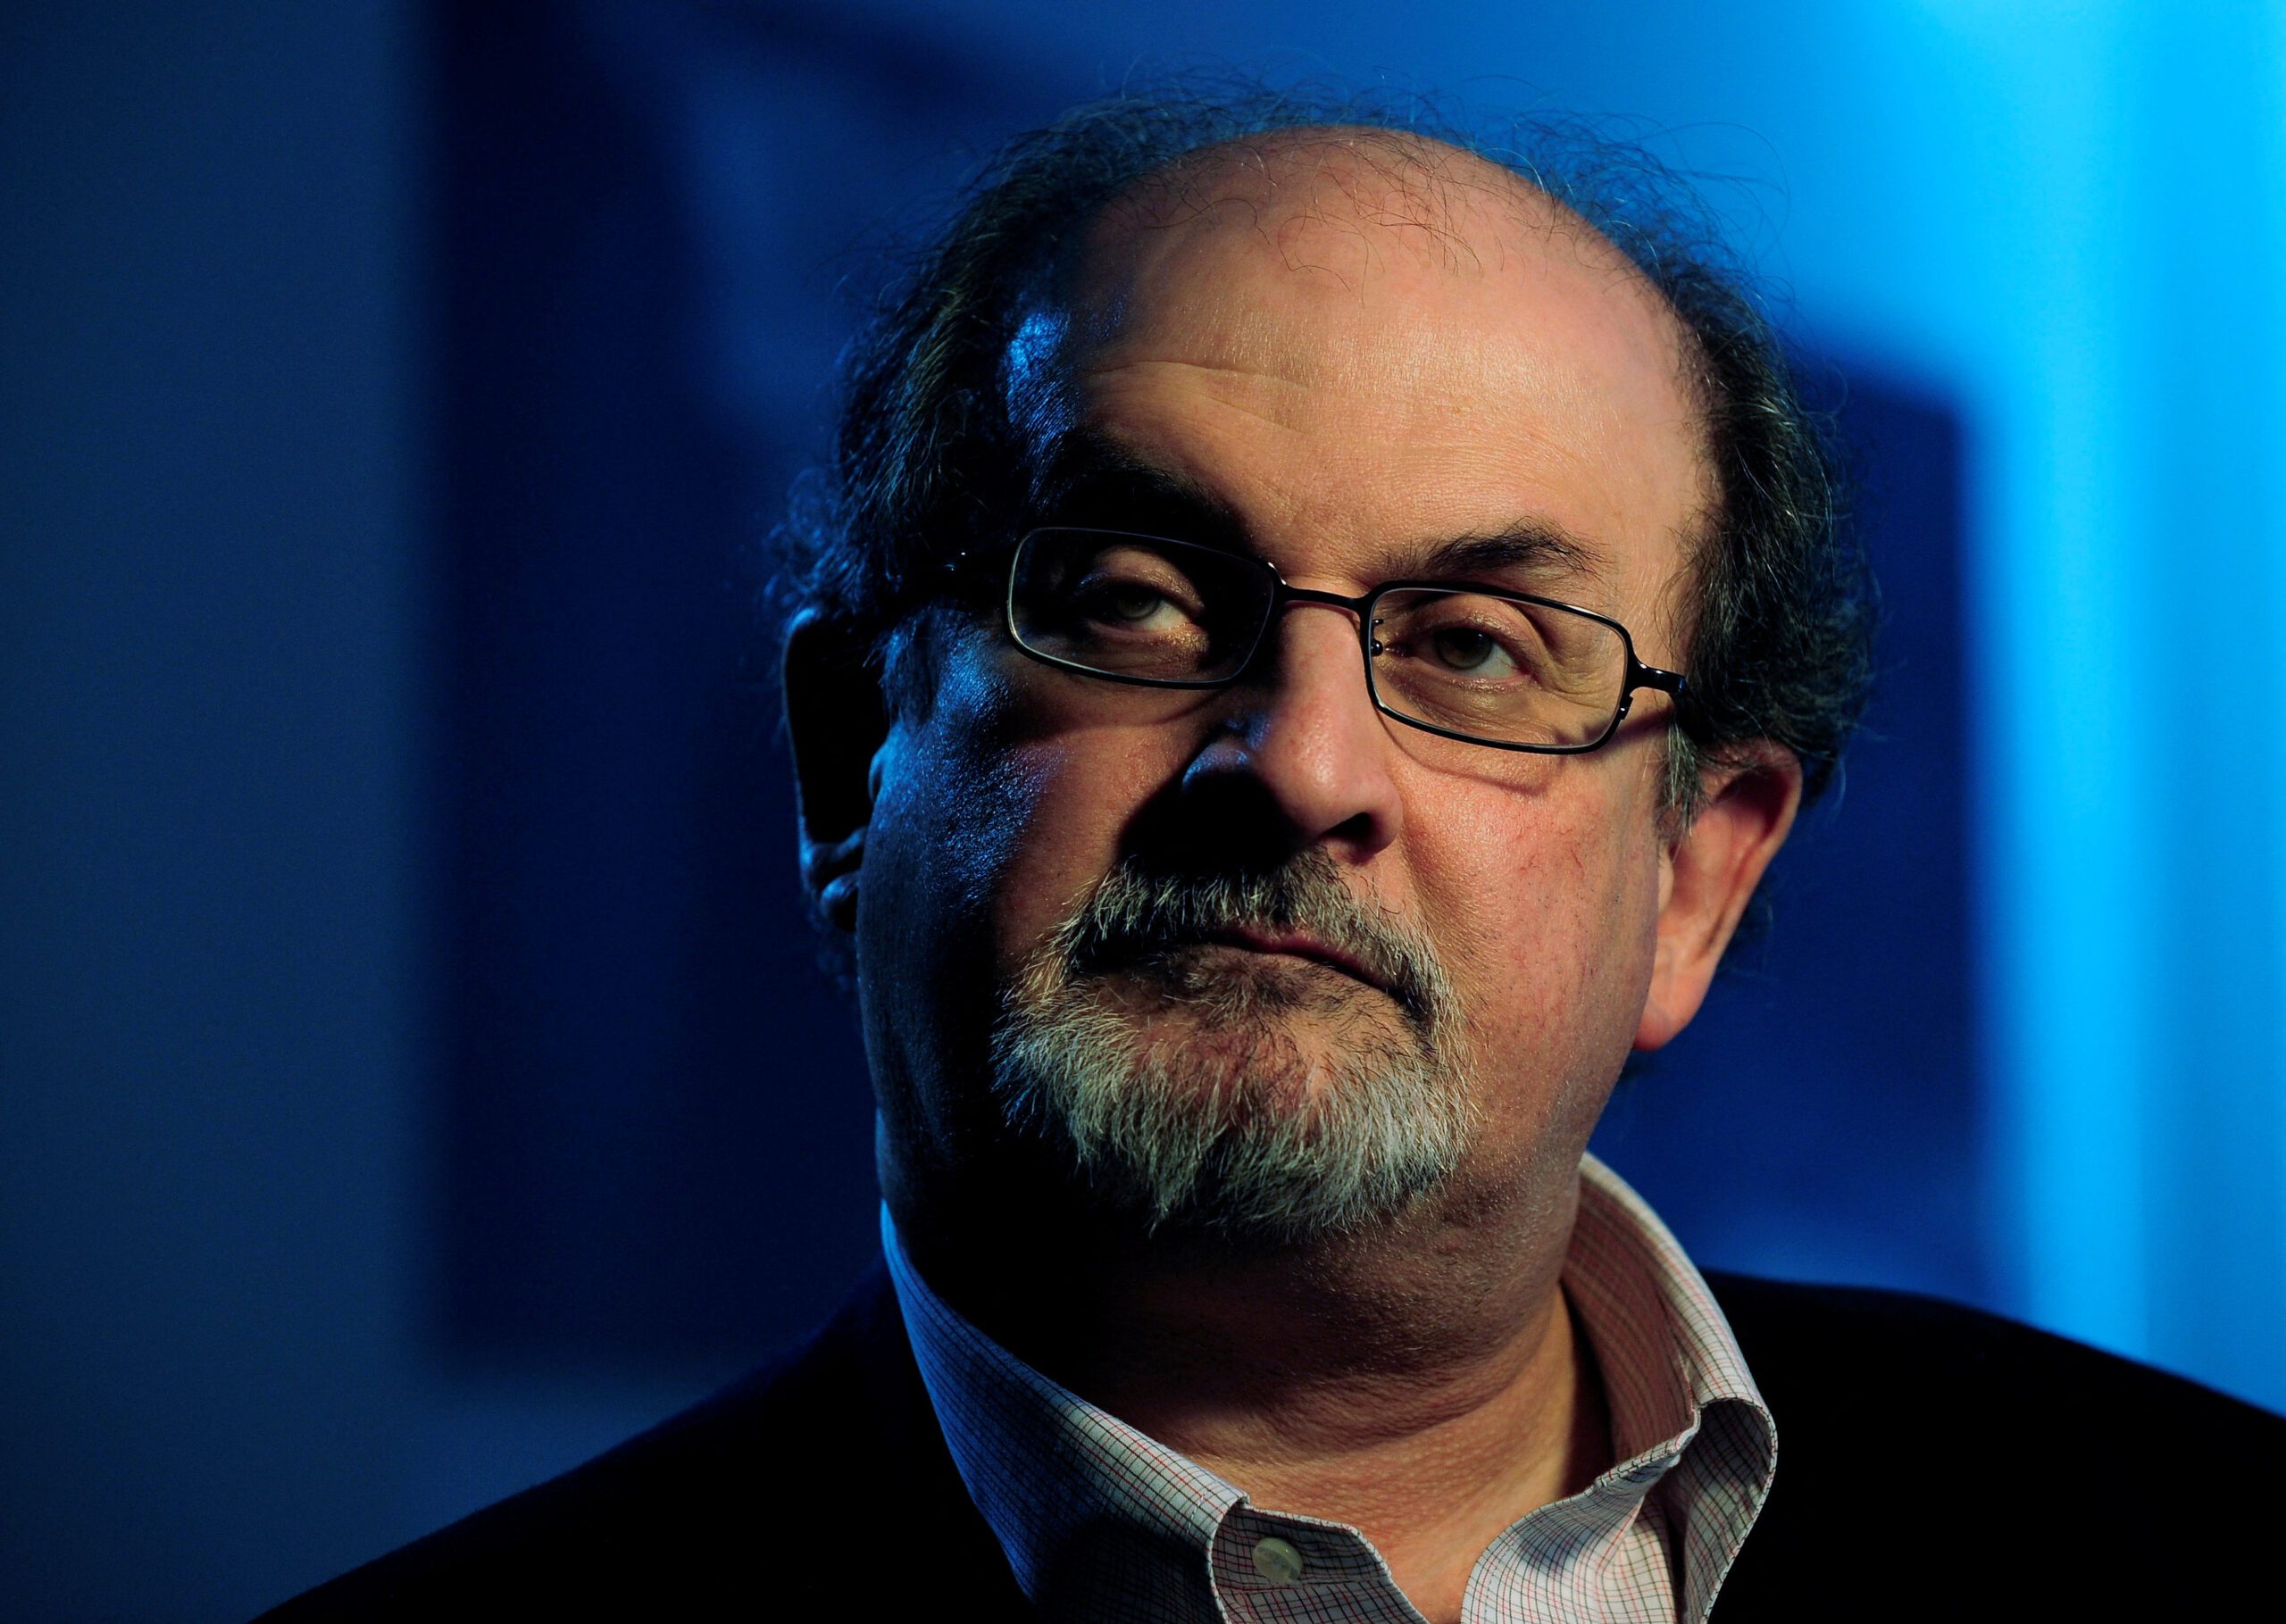 Writers, politicians react to violent attack on writer Salman Rushdie